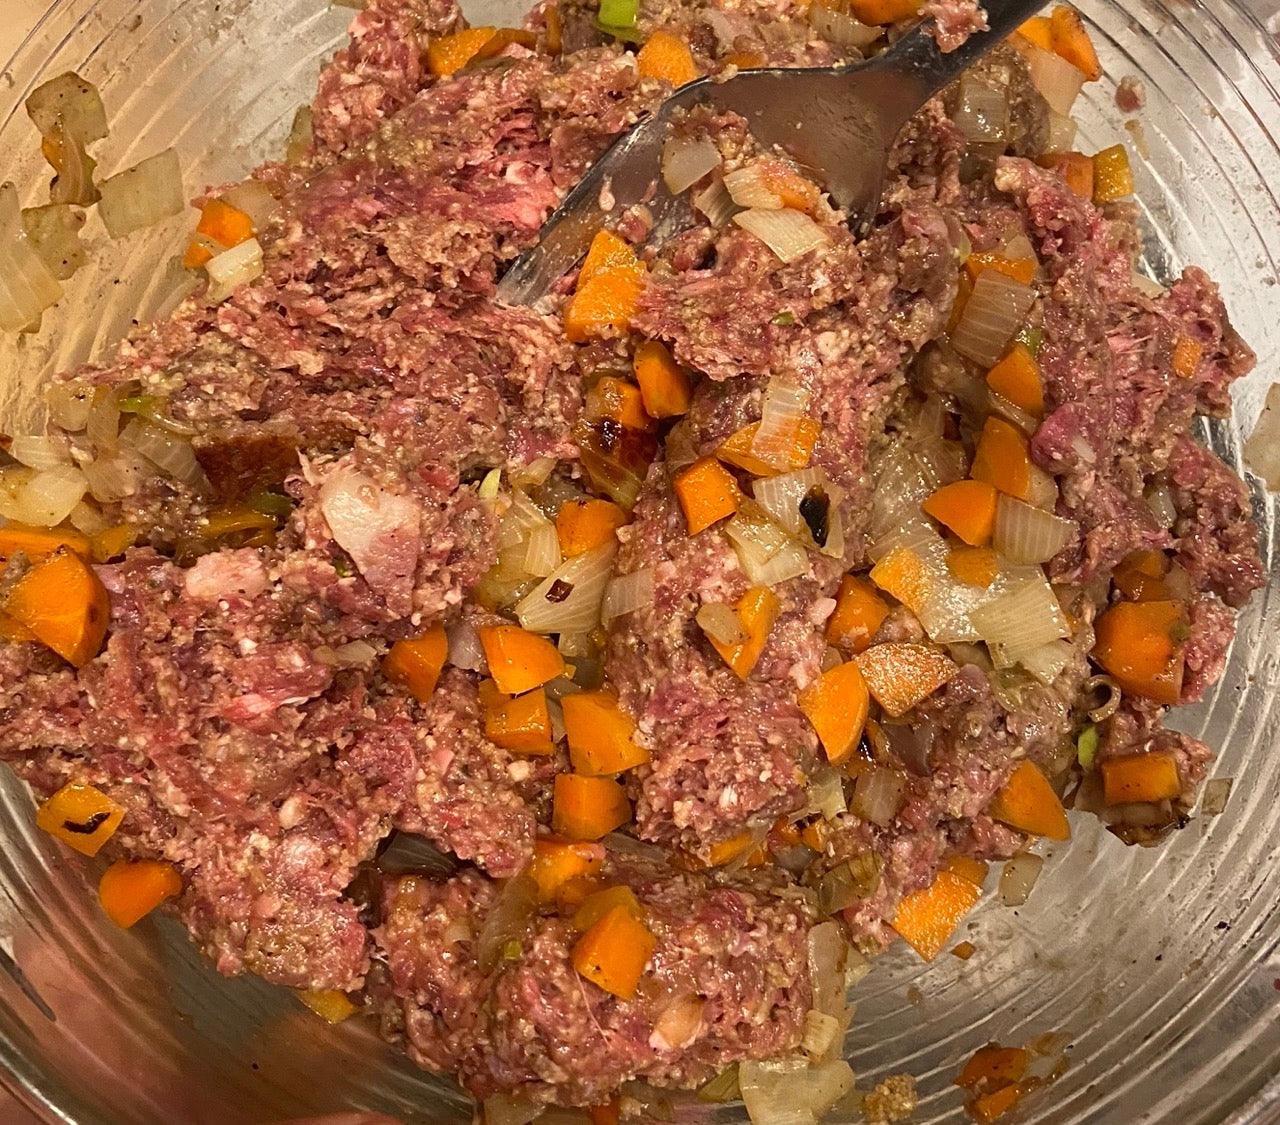 DOG FOOD Beef Share - Central Oregon pickup or Local Delivery